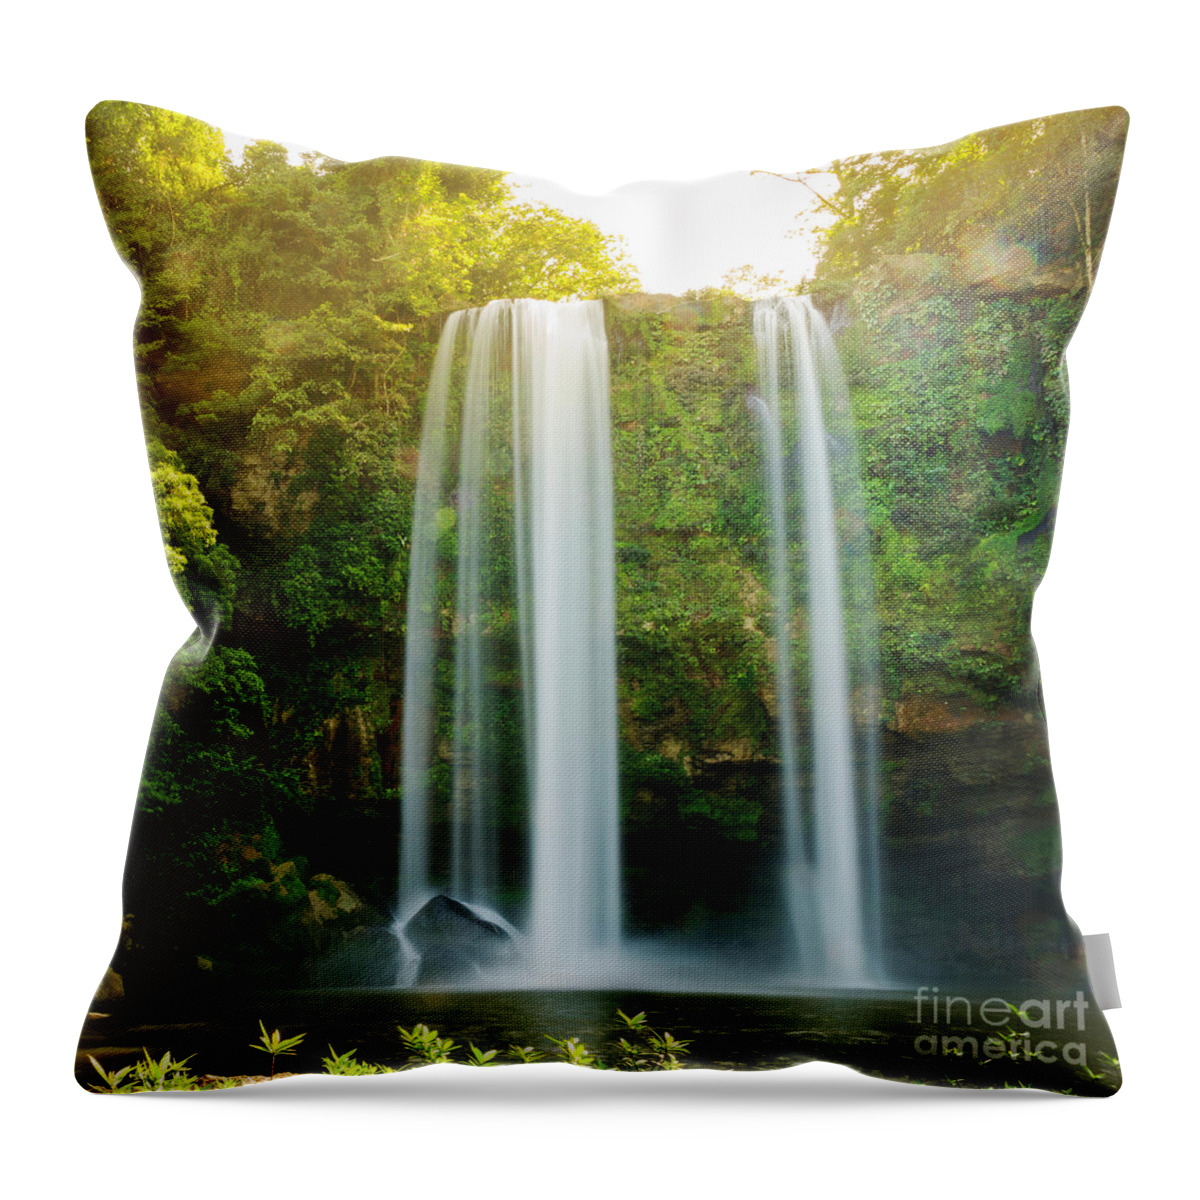 Landscape Throw Pillow featuring the photograph Misol Ha Waterfall Palenque by THP Creative